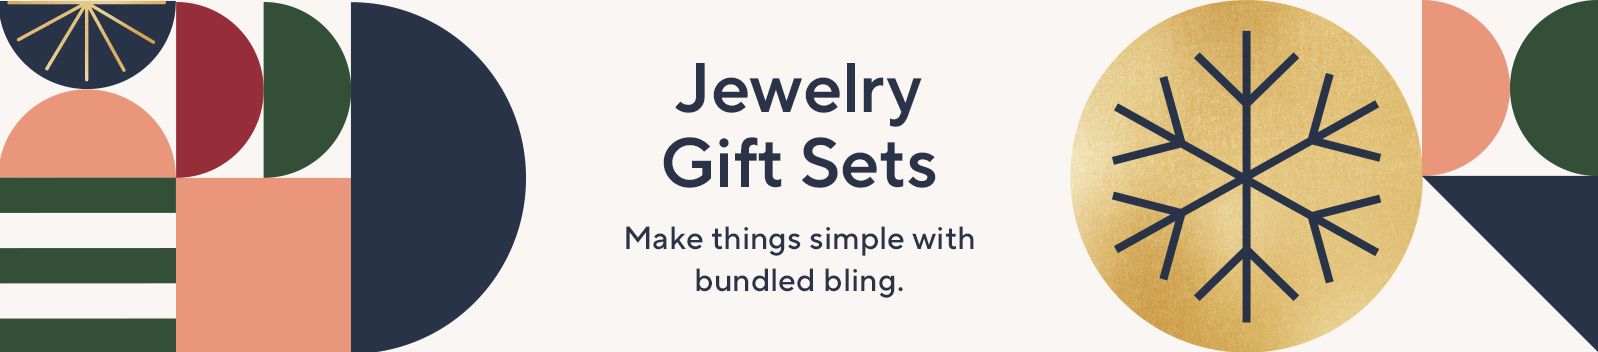 Jewelry Gift Sets. Make things simple with bundled bling.